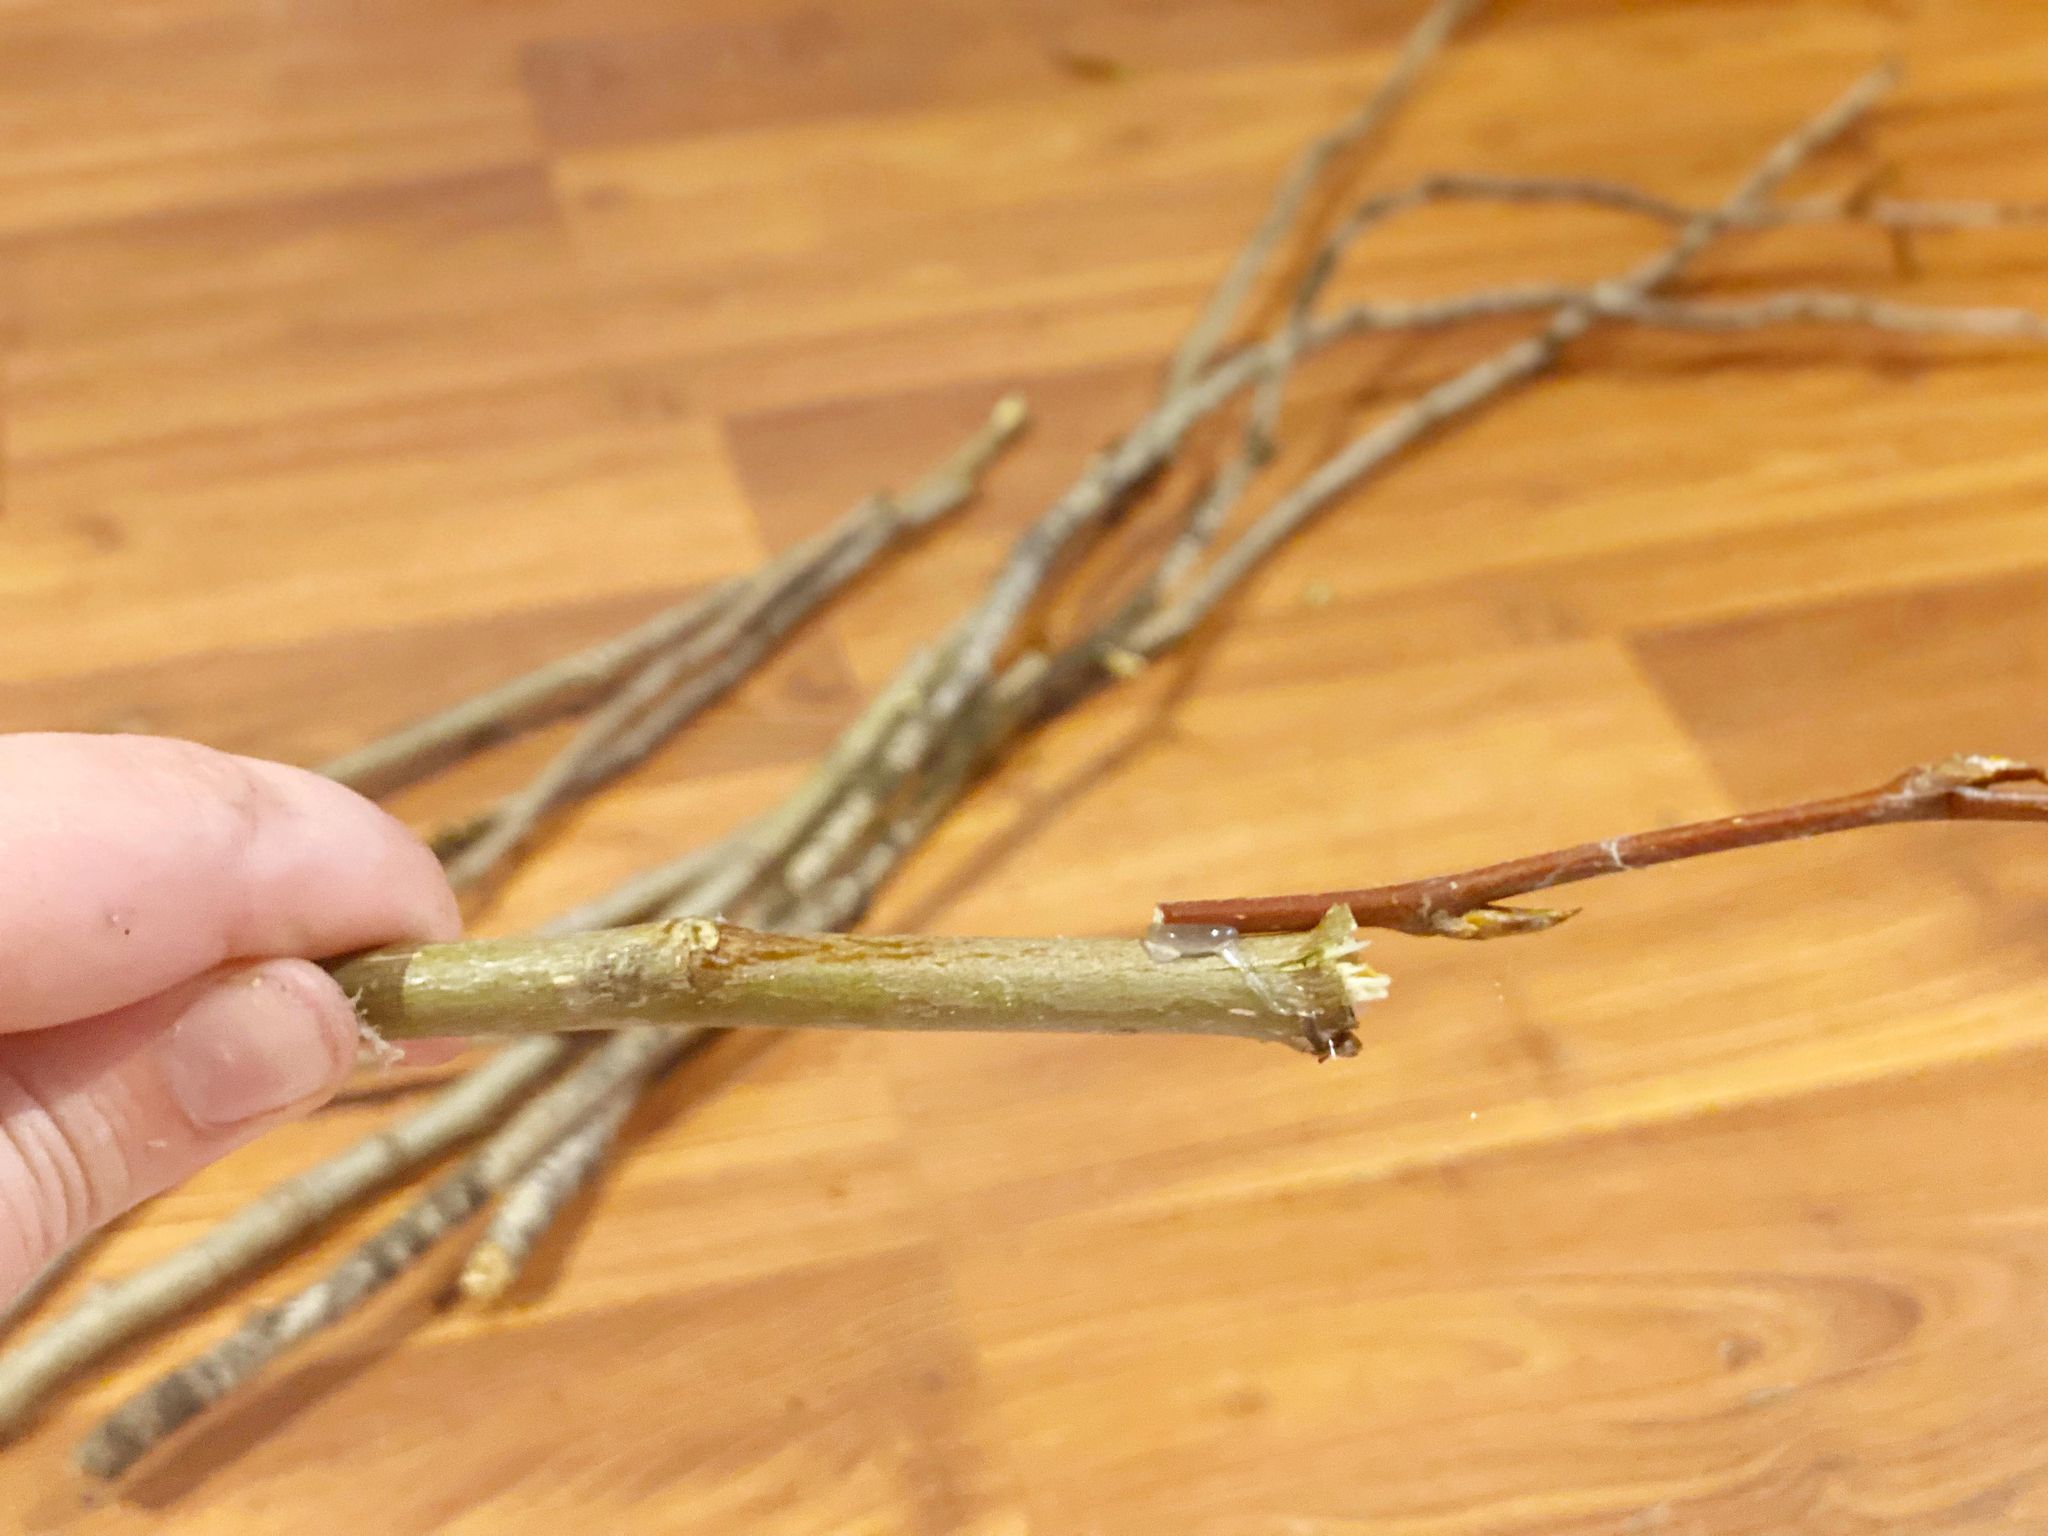 Use hot glue to attach the twigs.